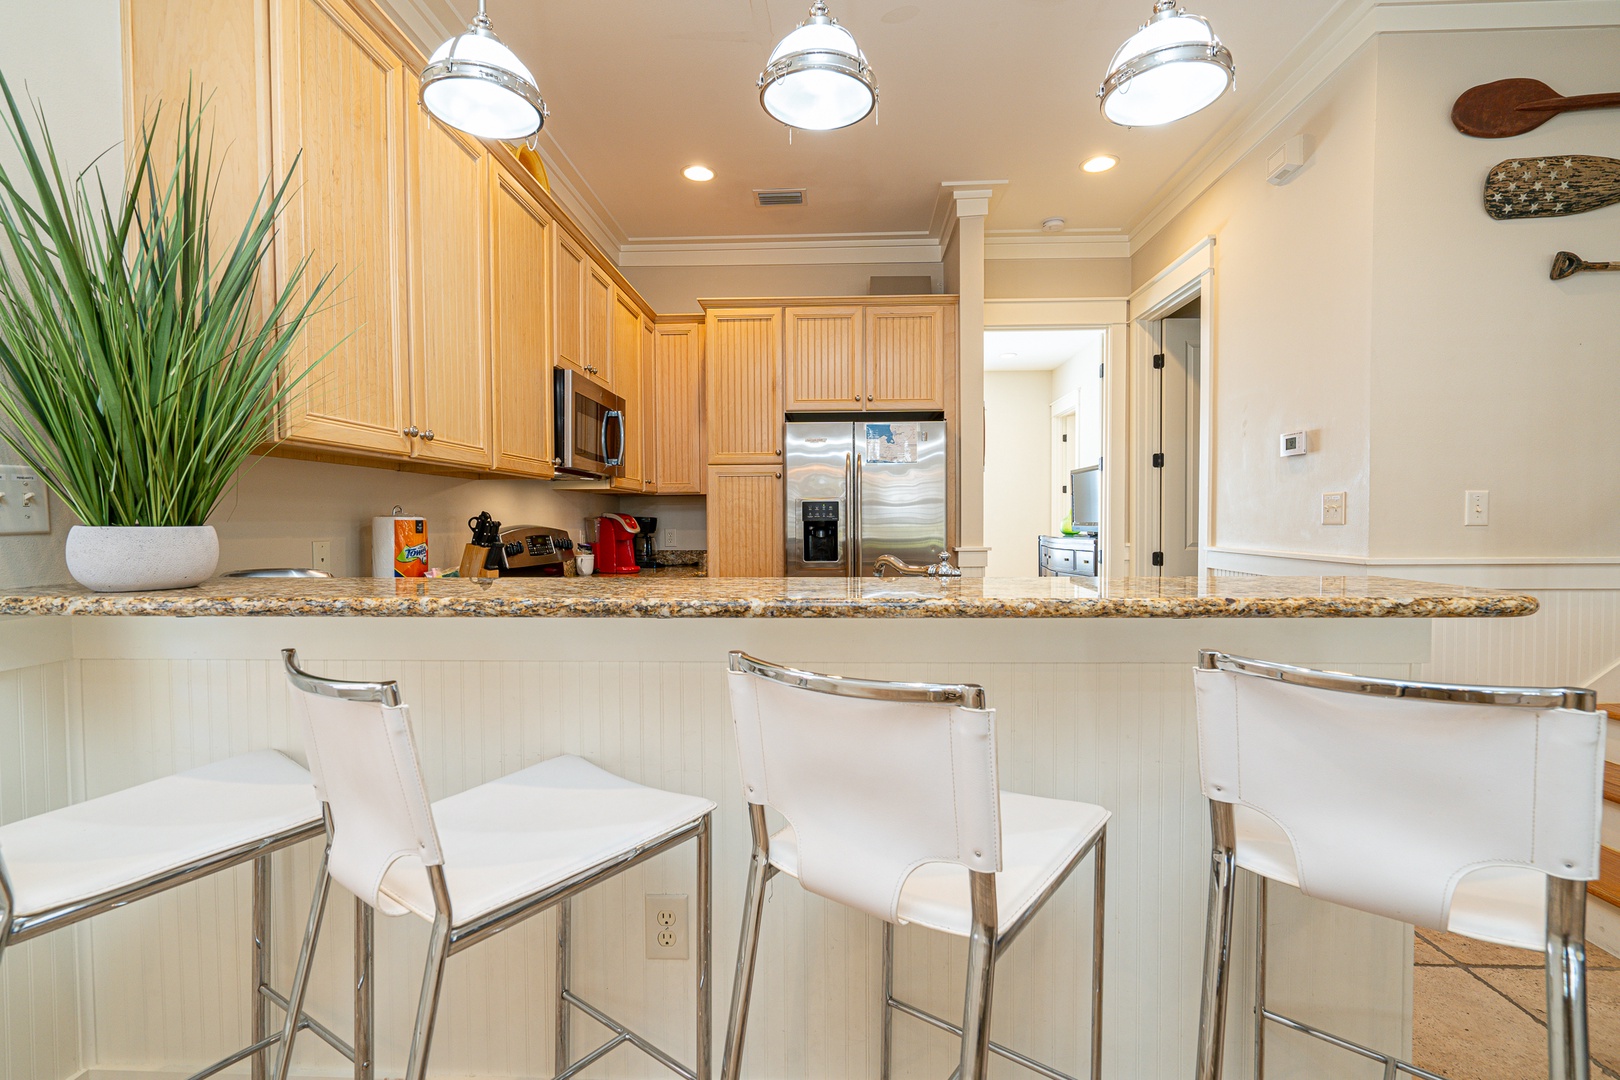 Grab a quick bite at the kitchen counter, with seating for 4